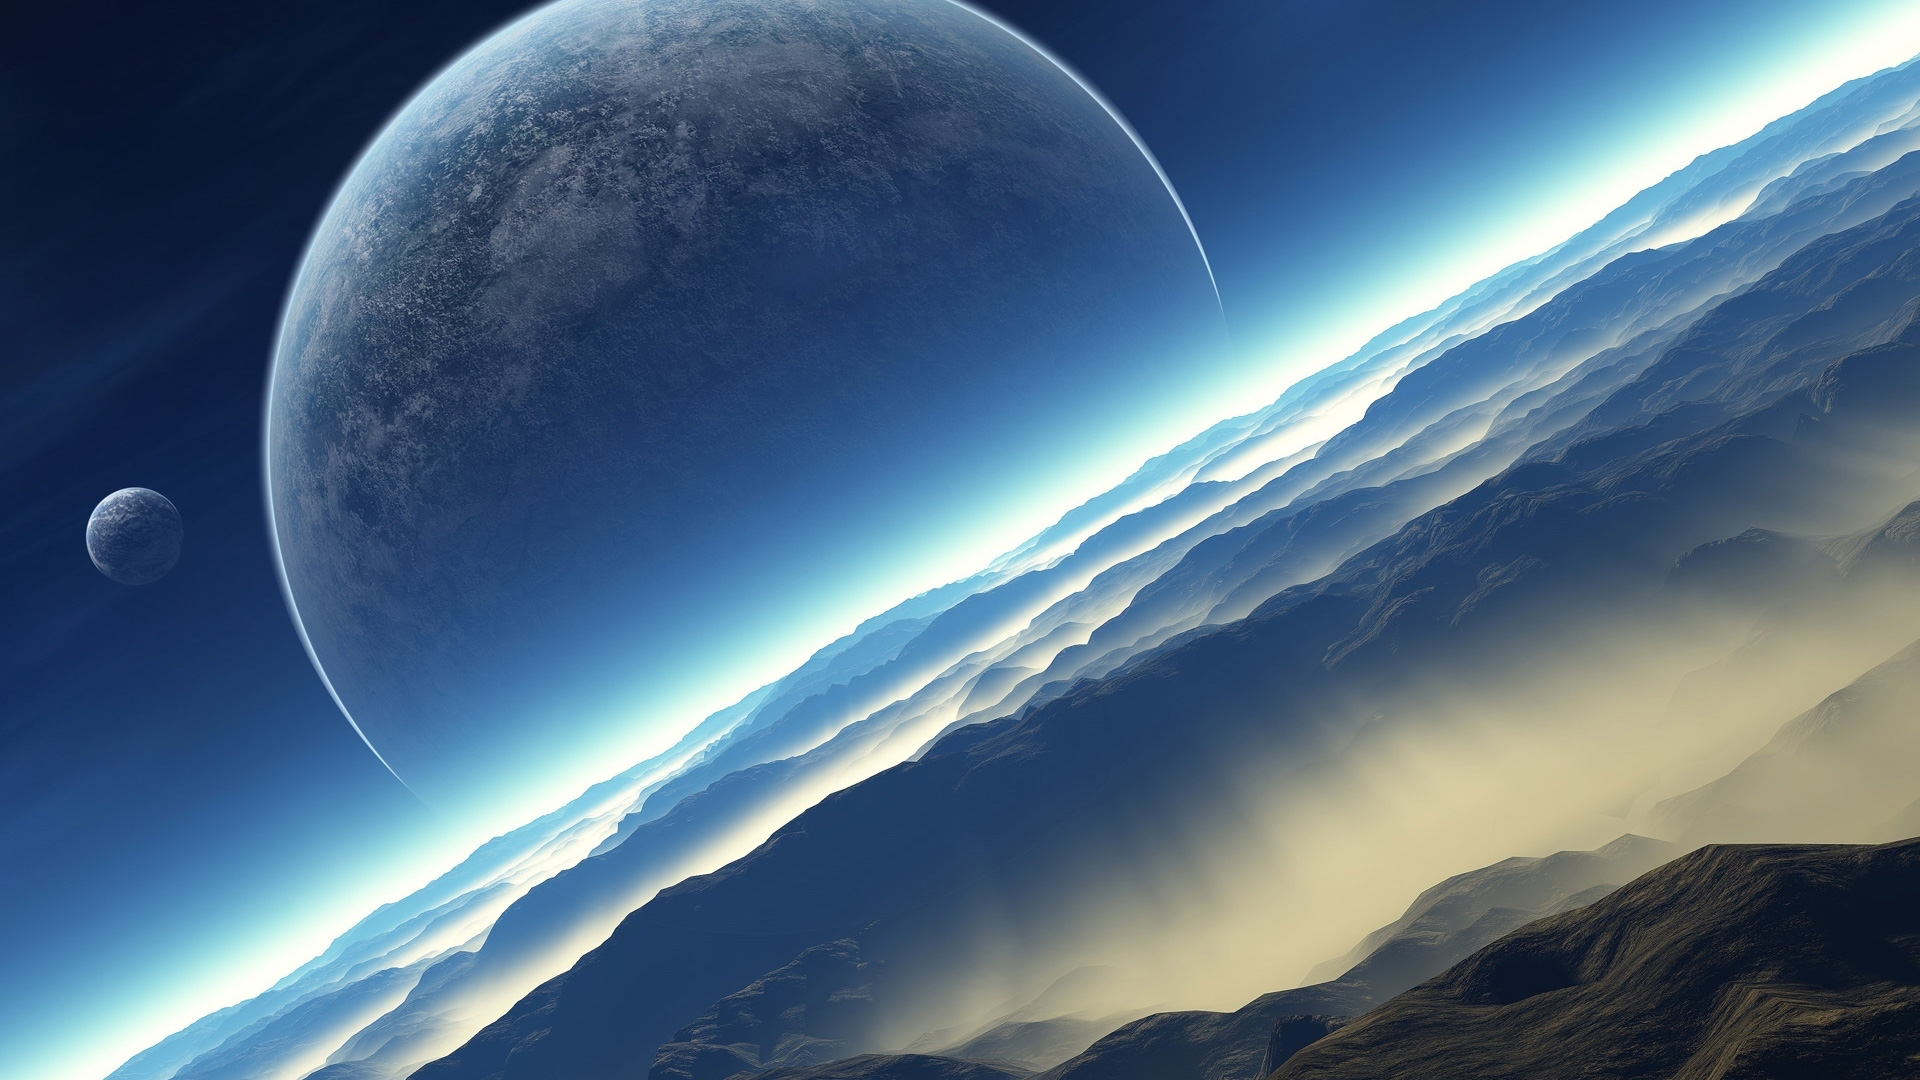 High Definition Space Wallpaper Full HD 1080p